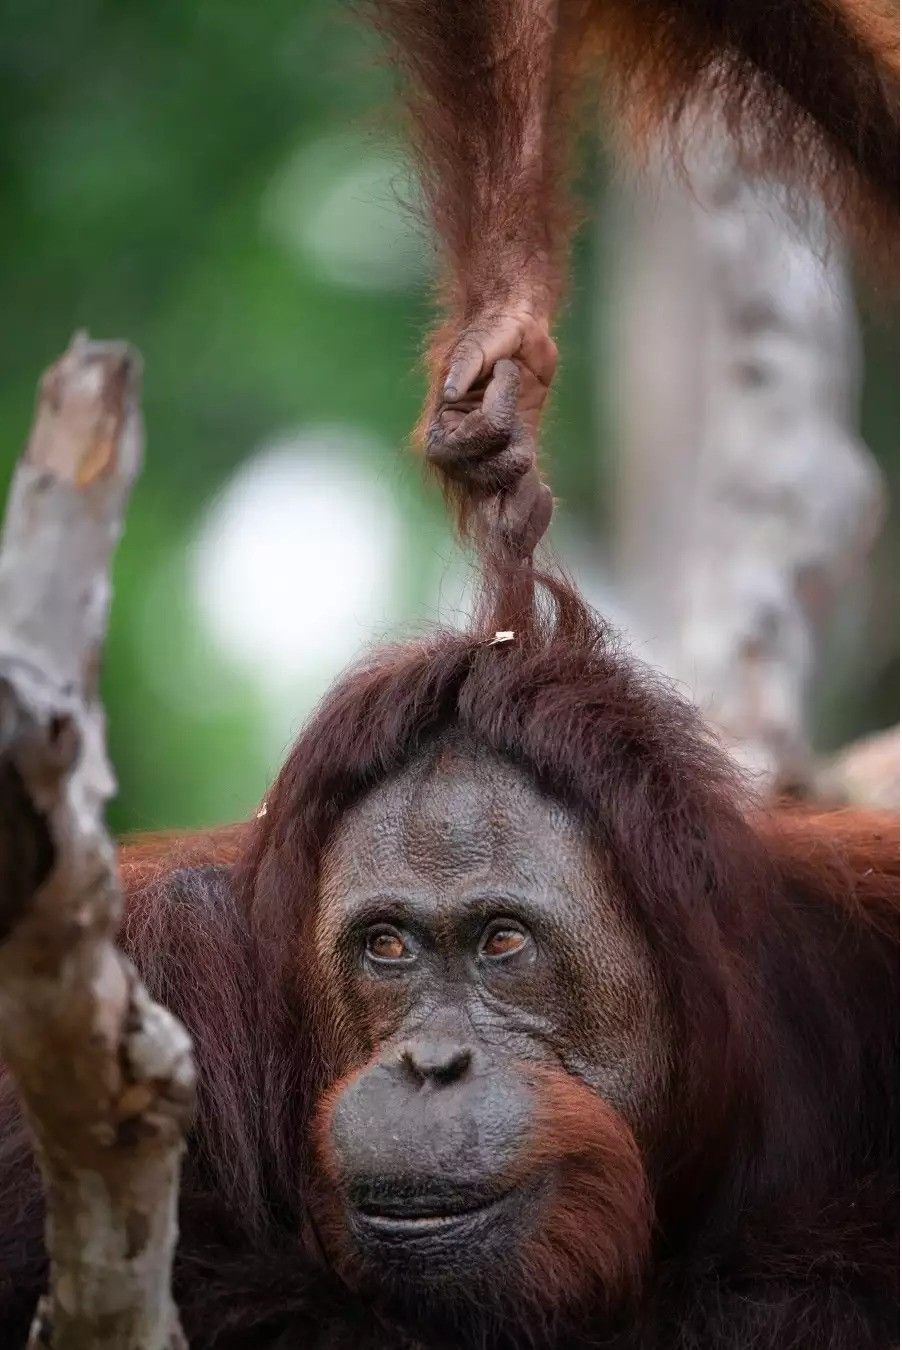 a hand of a young orangutan reaches down from out of the frame, pulling the hair on the head of an adult orangutan